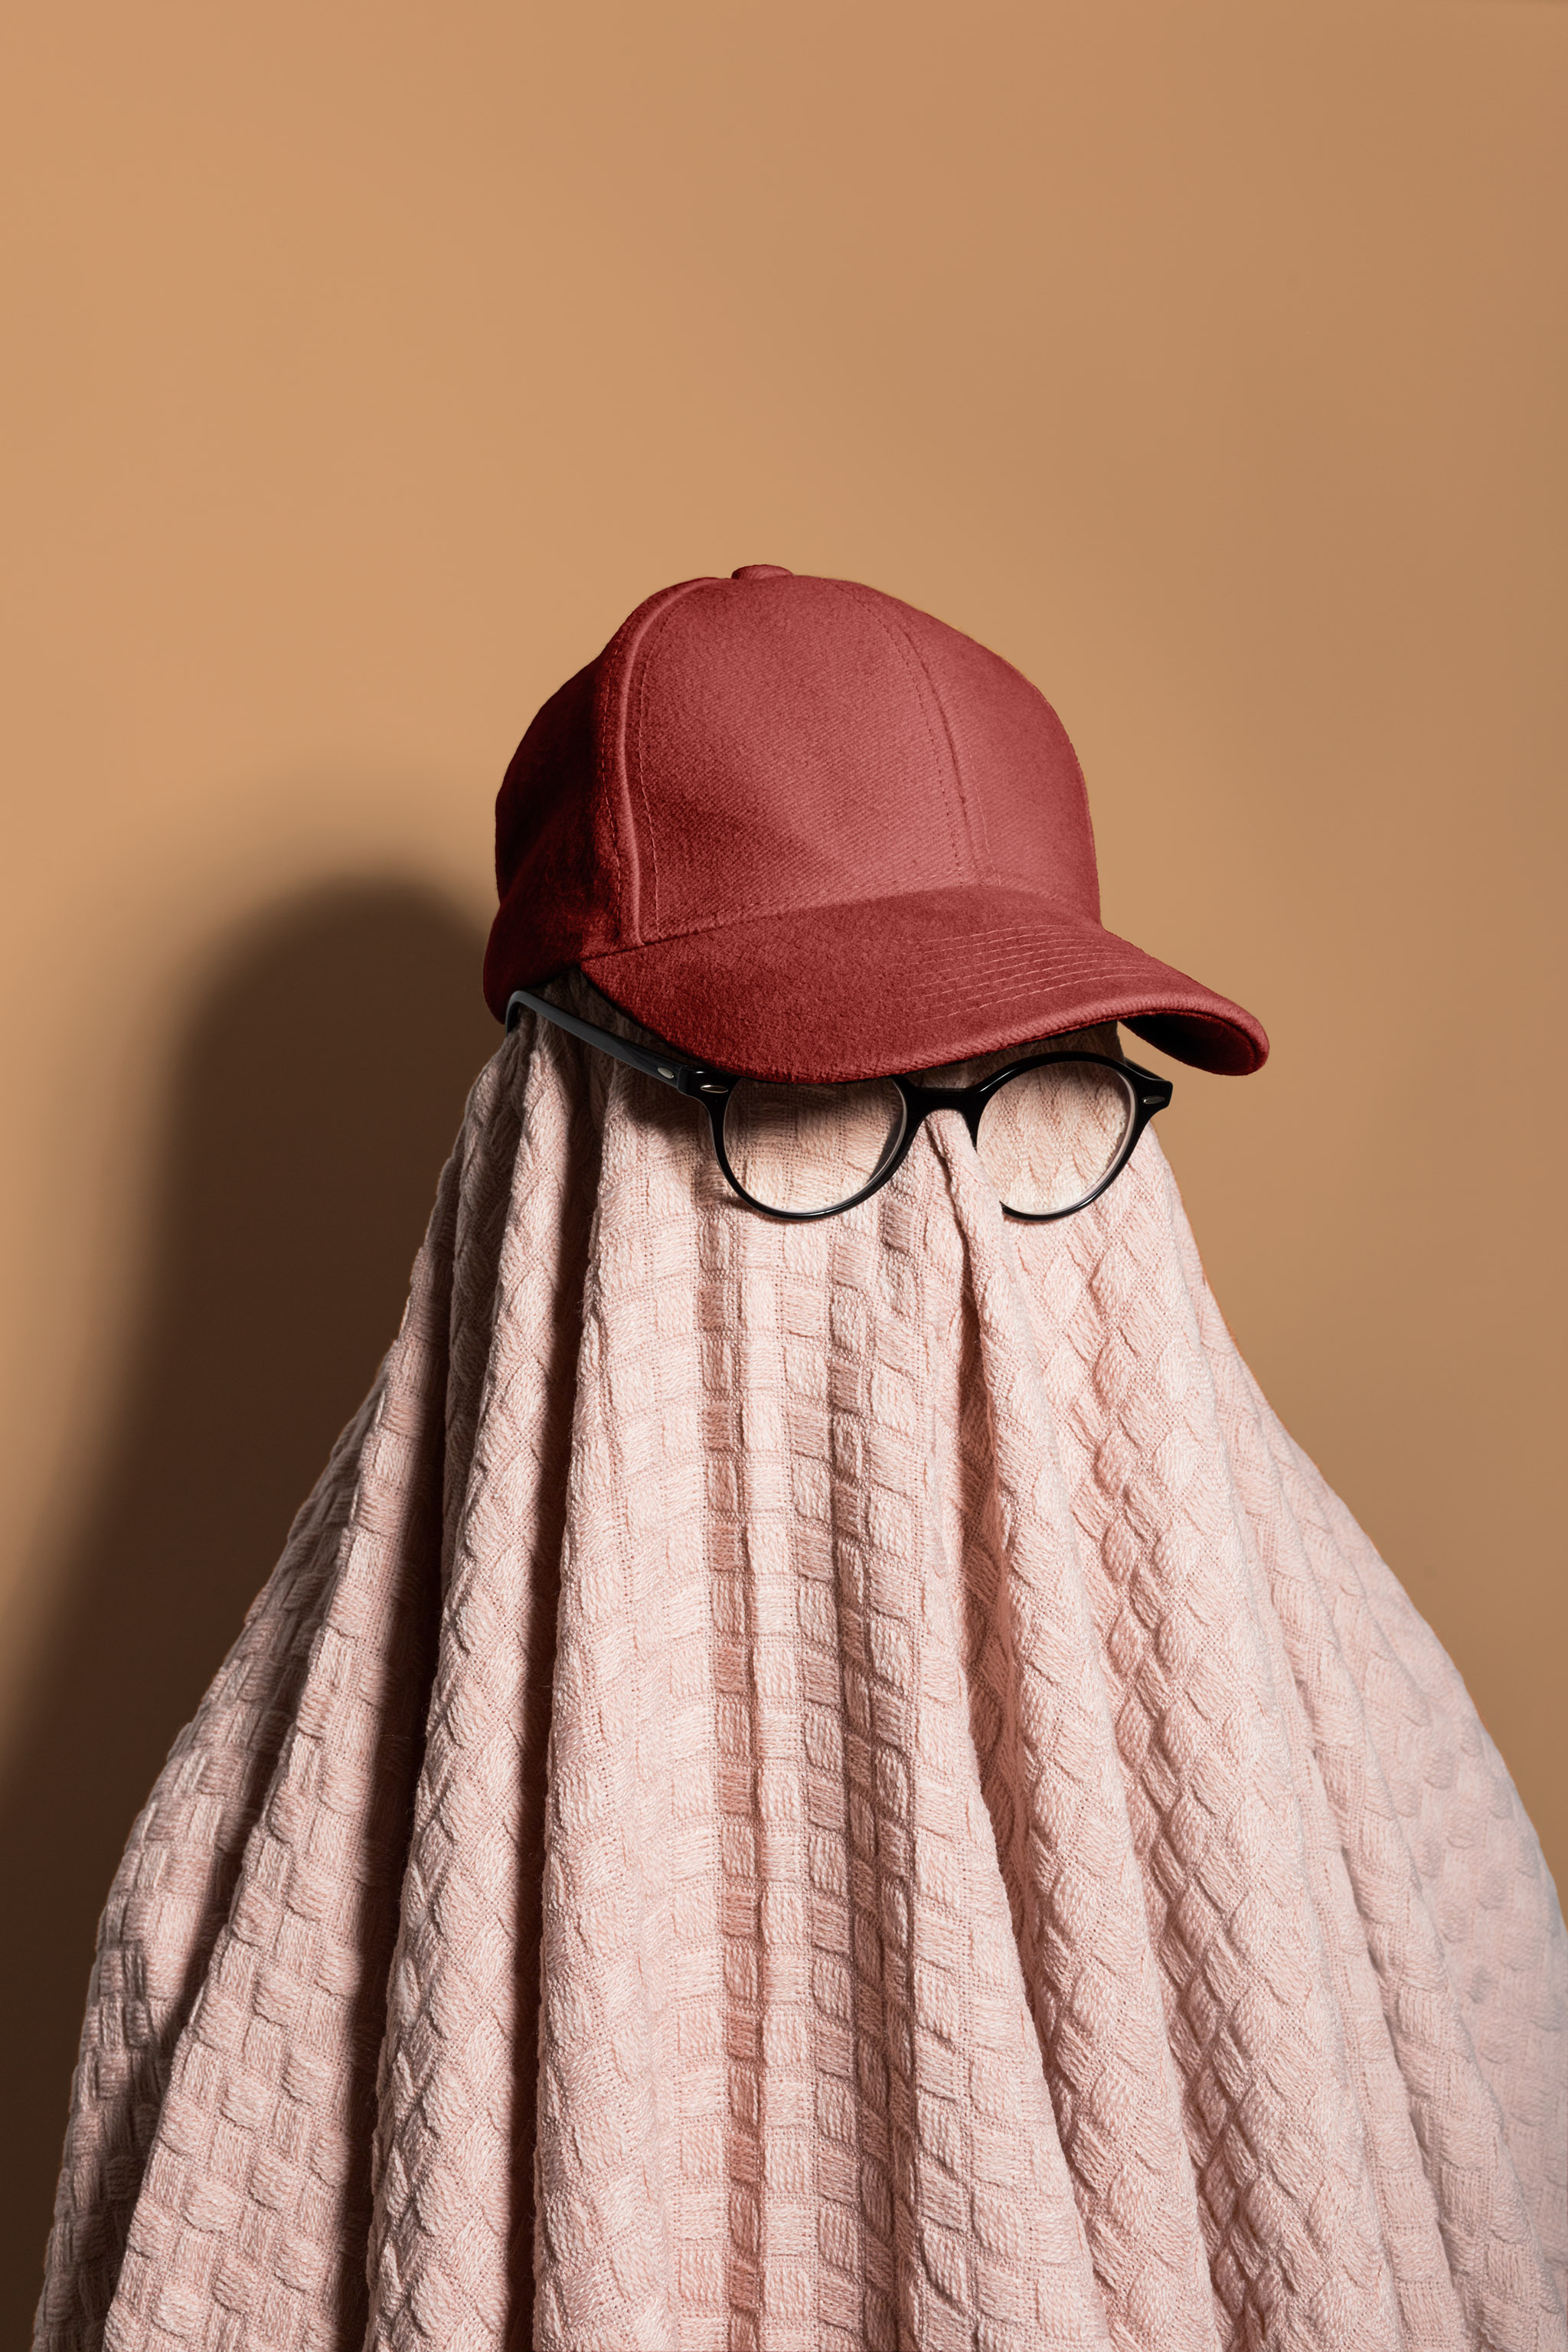 Mockup of a covered person with eyeglasses and a baseball hat on a studio background, empty mockup.